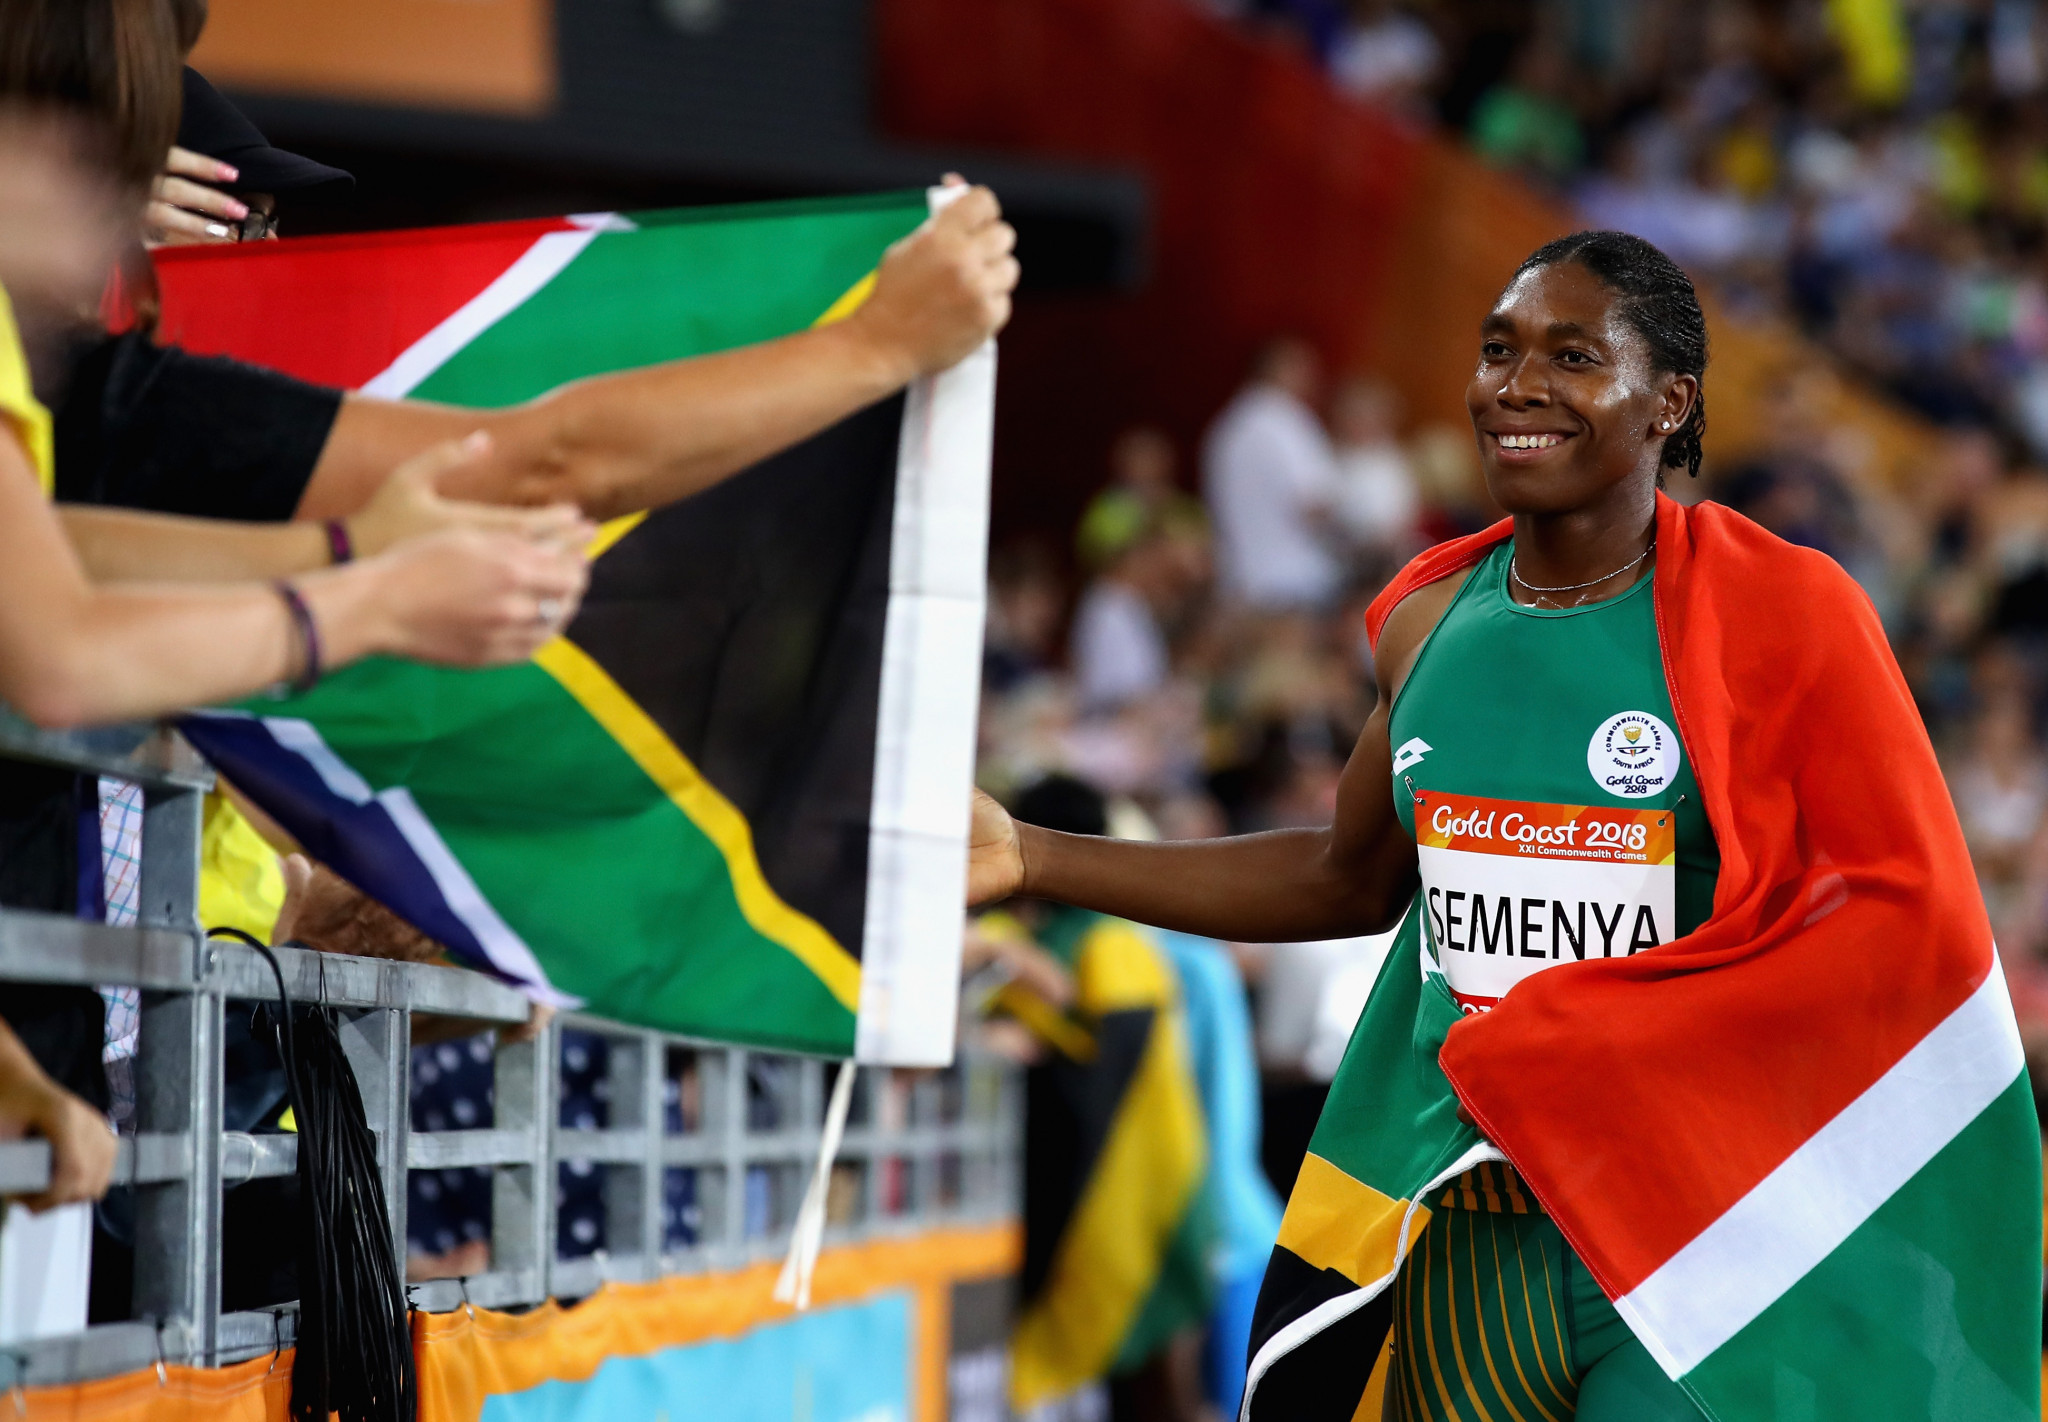 Semenya and Cheptegei complete track doubles at Gold Coast 2018